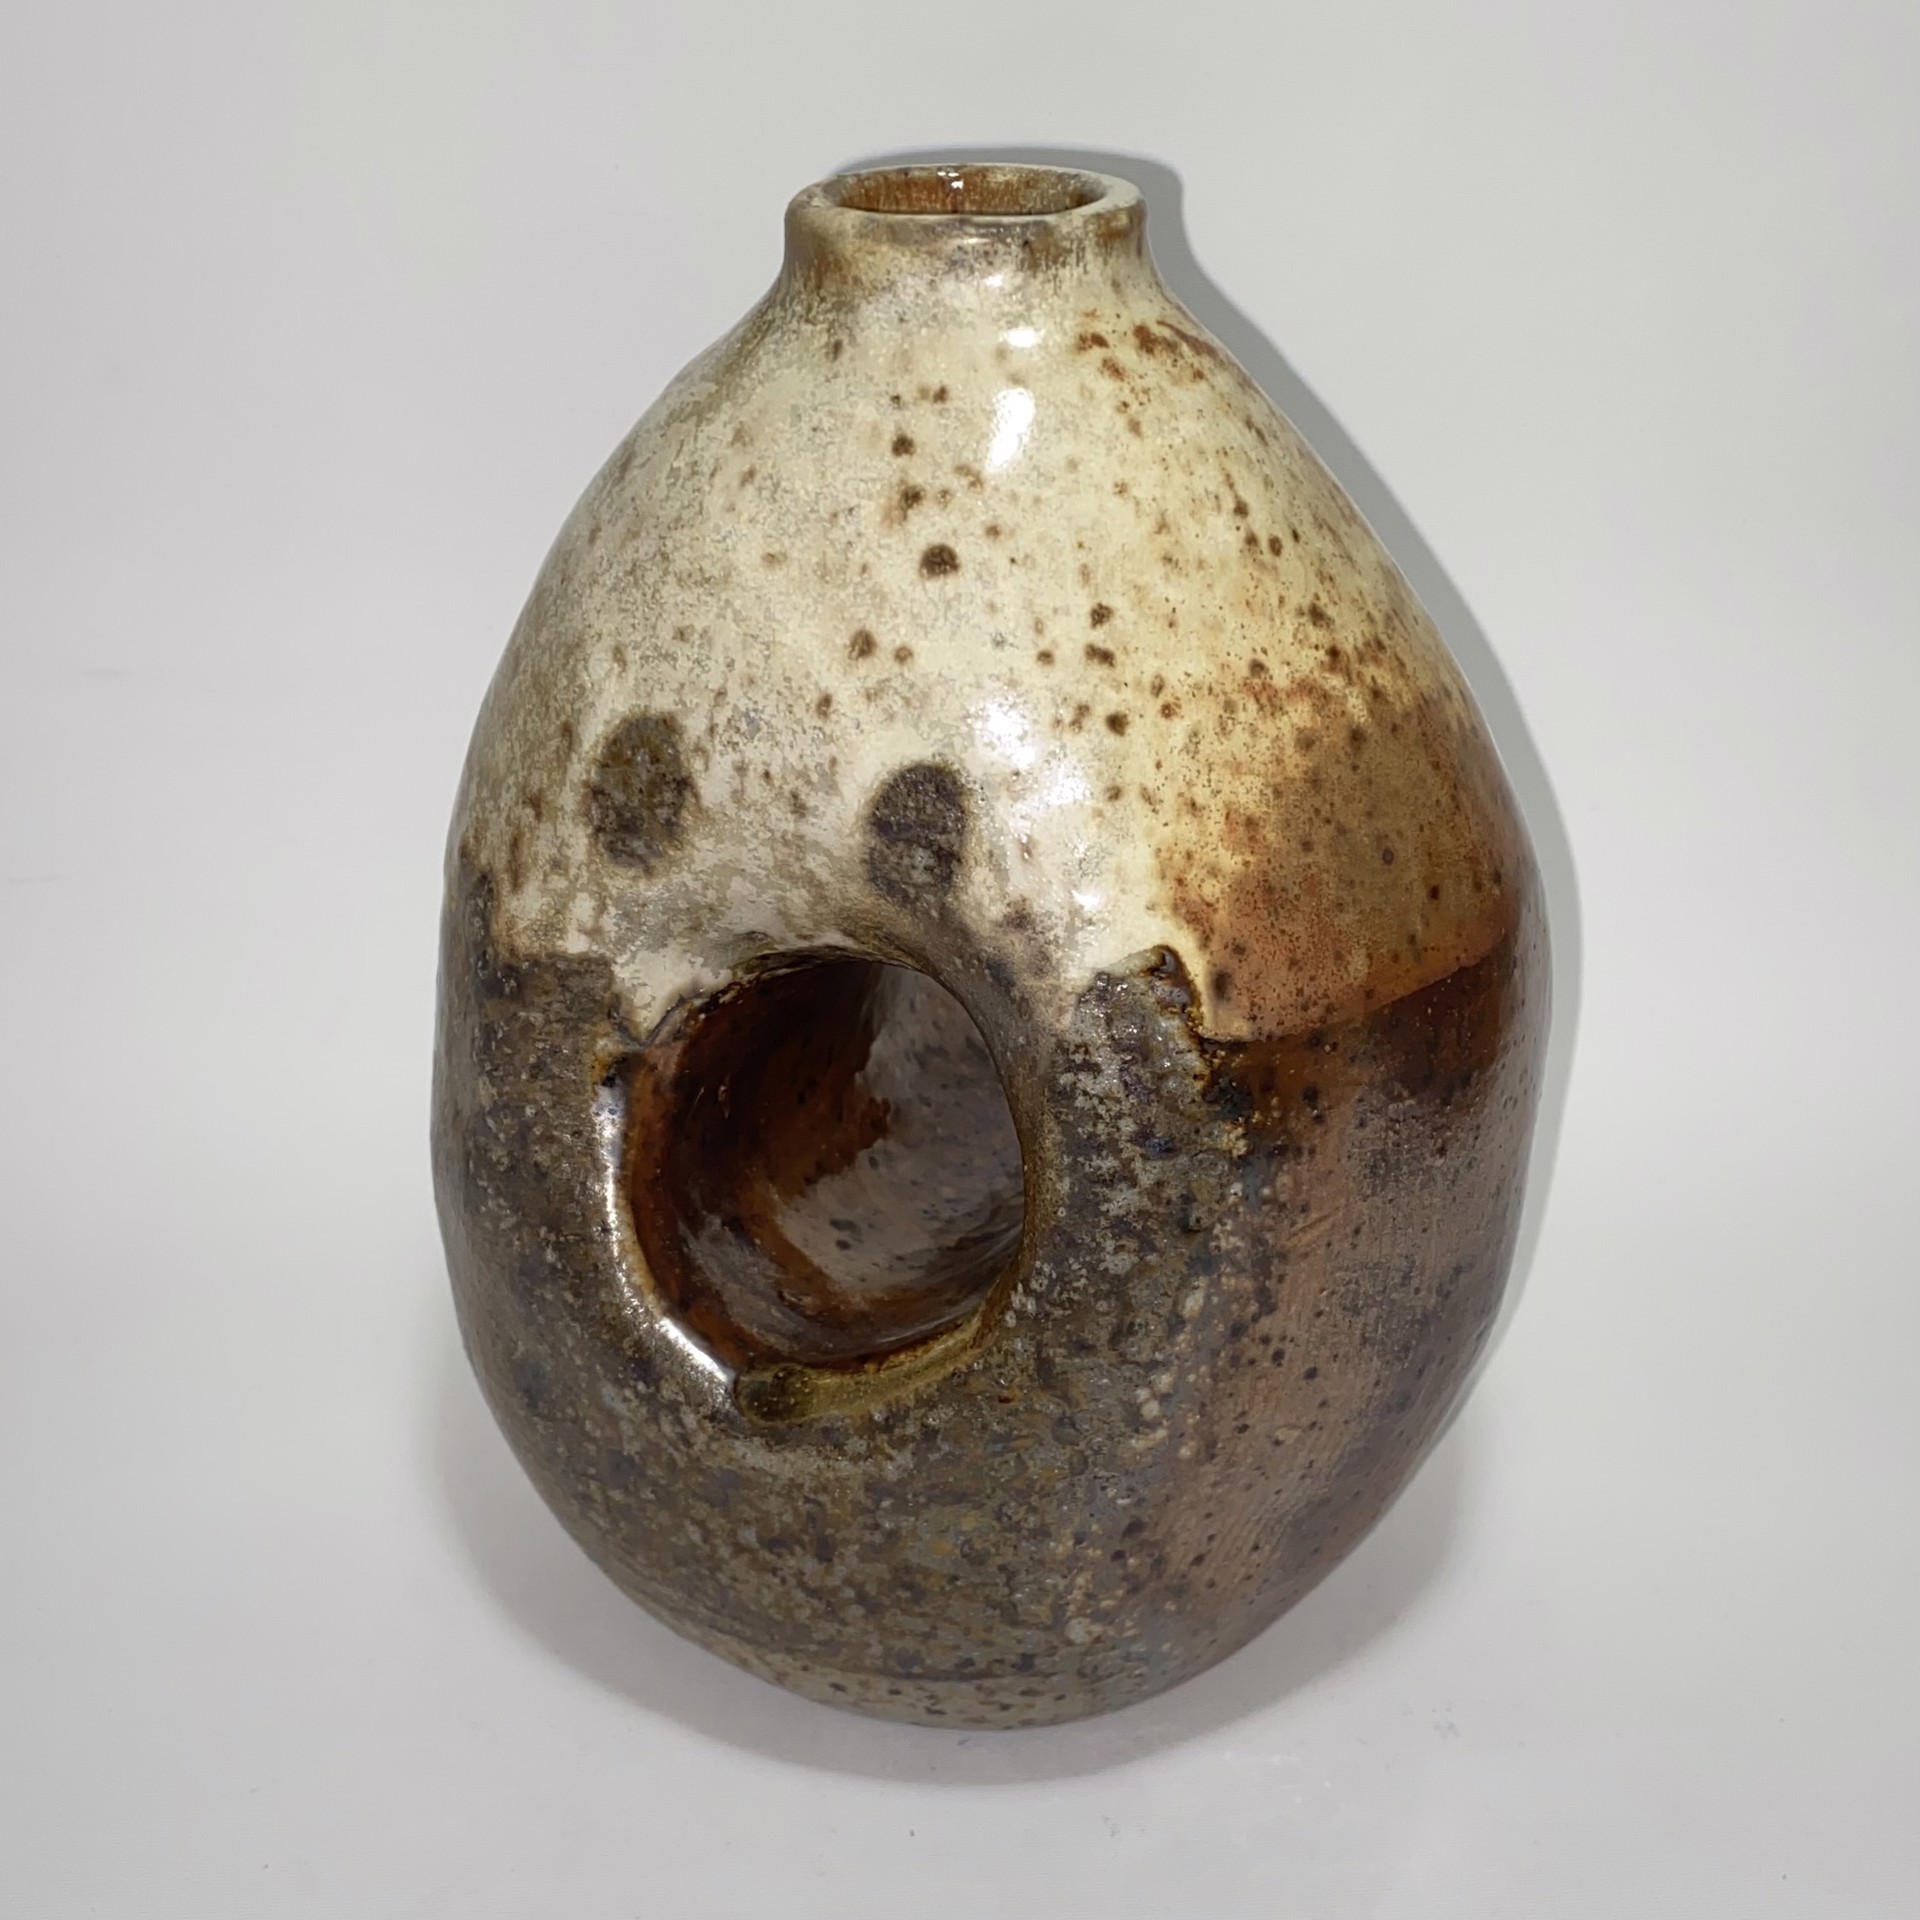 Wood-Fired Lacuna Pot 2 by Mary Delmege